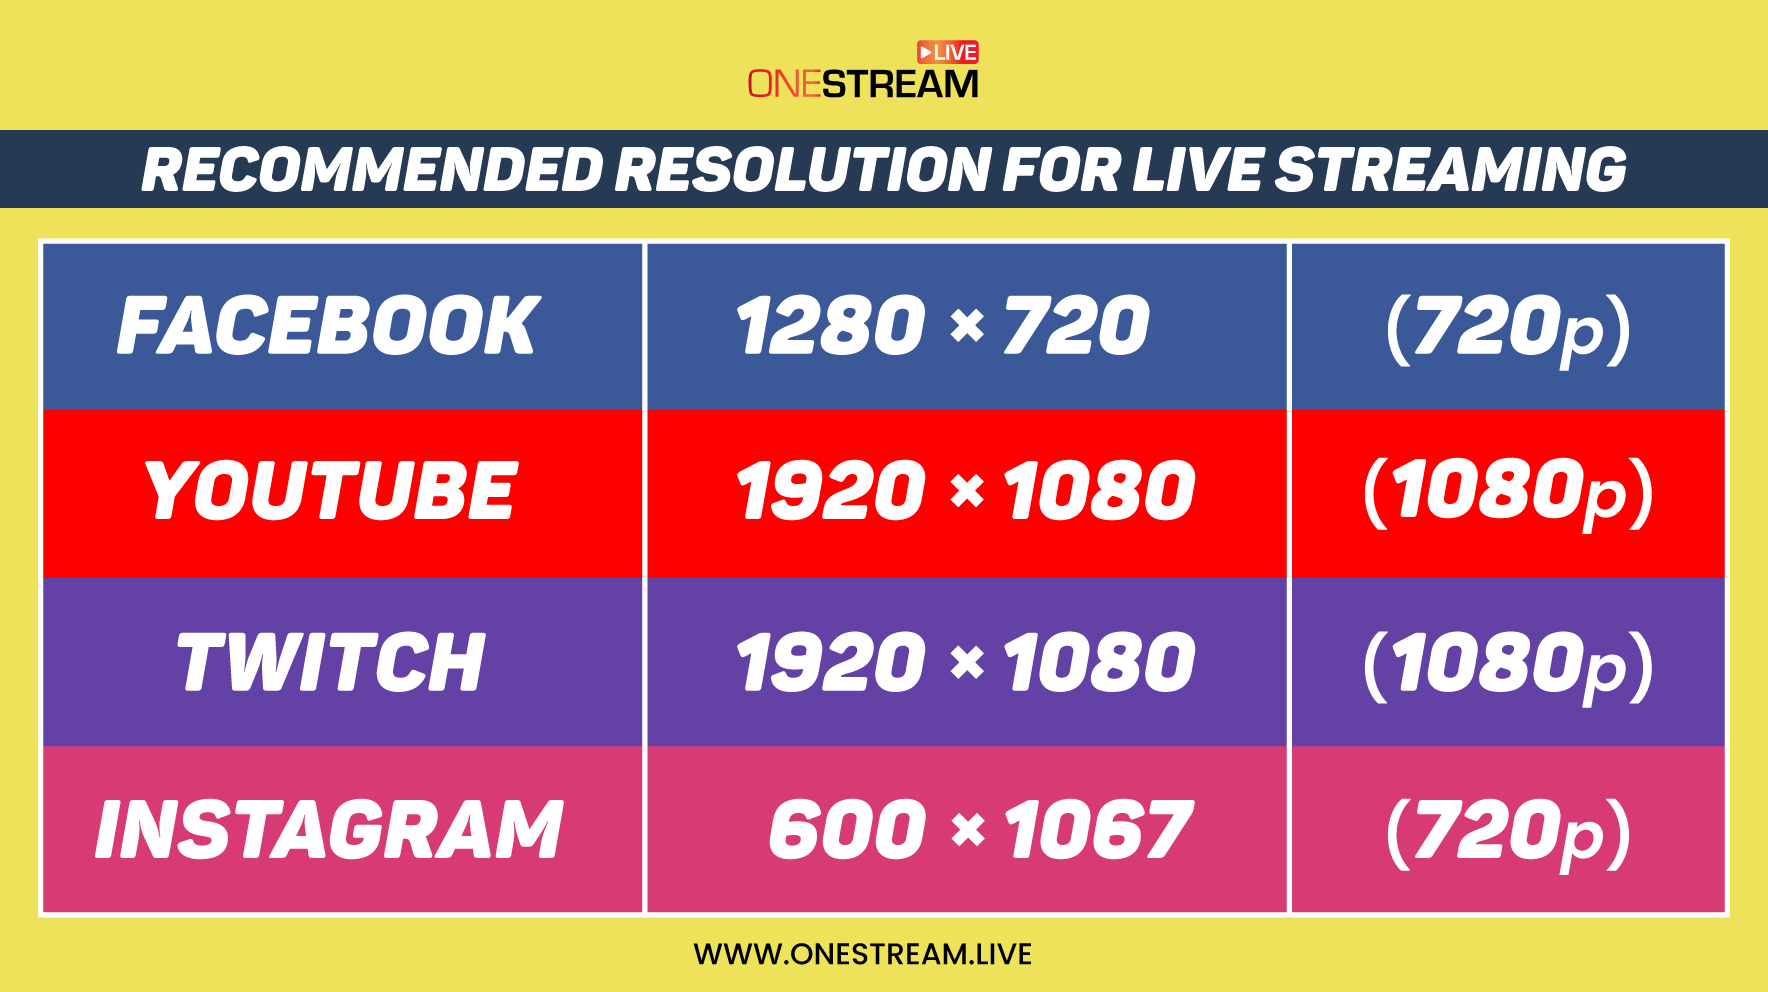 Recommended resolution for live streaming